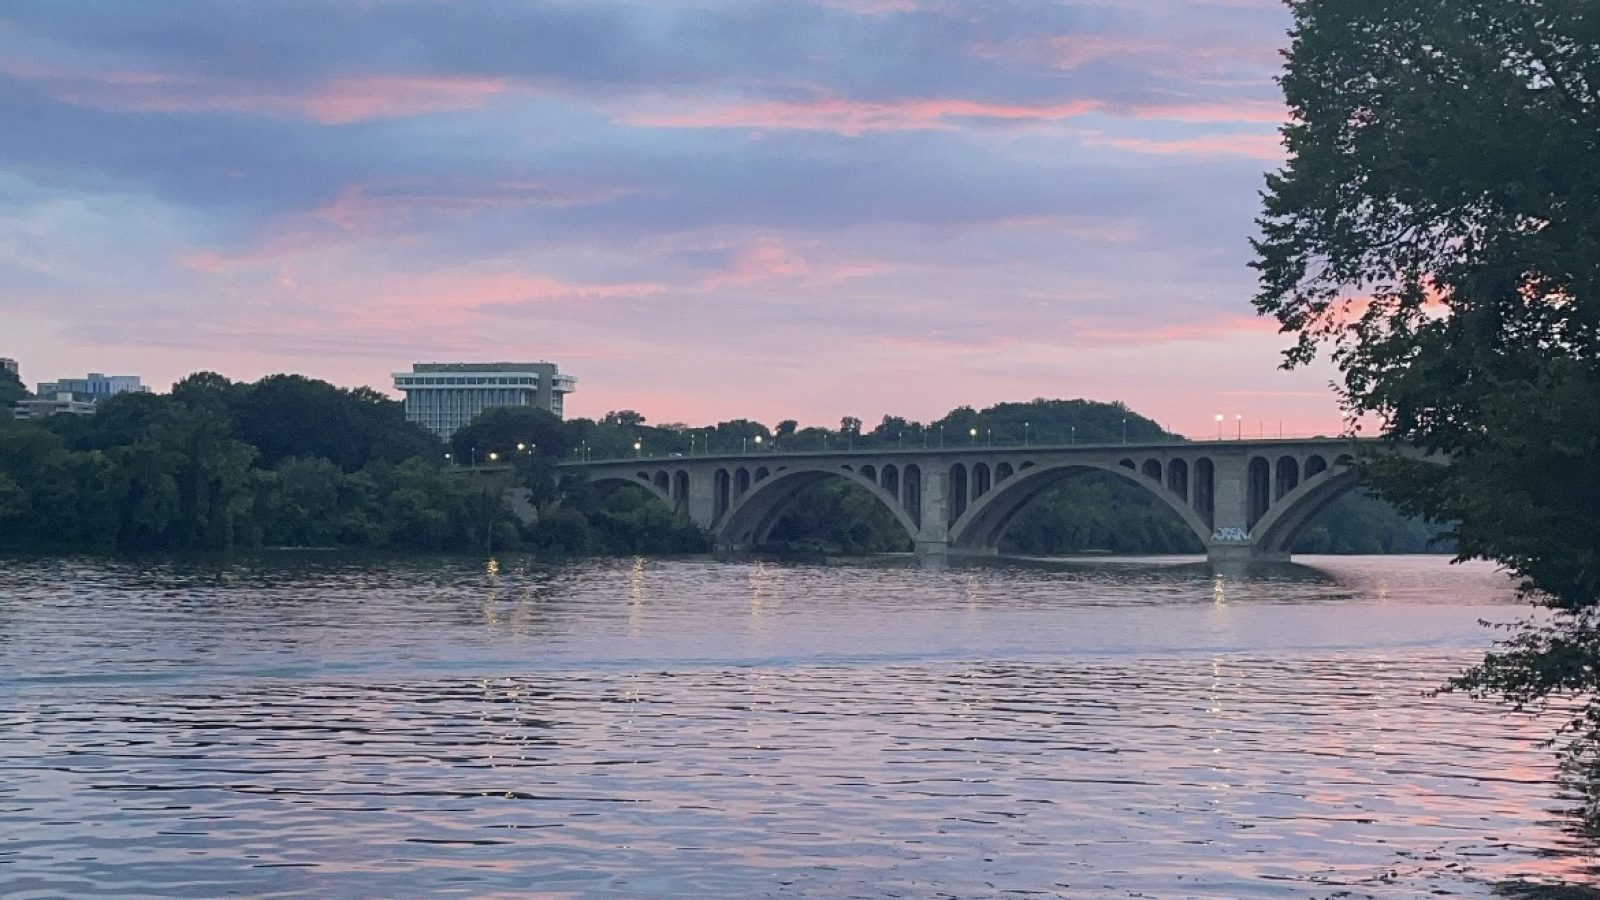 View of Potomac River and Key Bridge during a pink and purple sunset